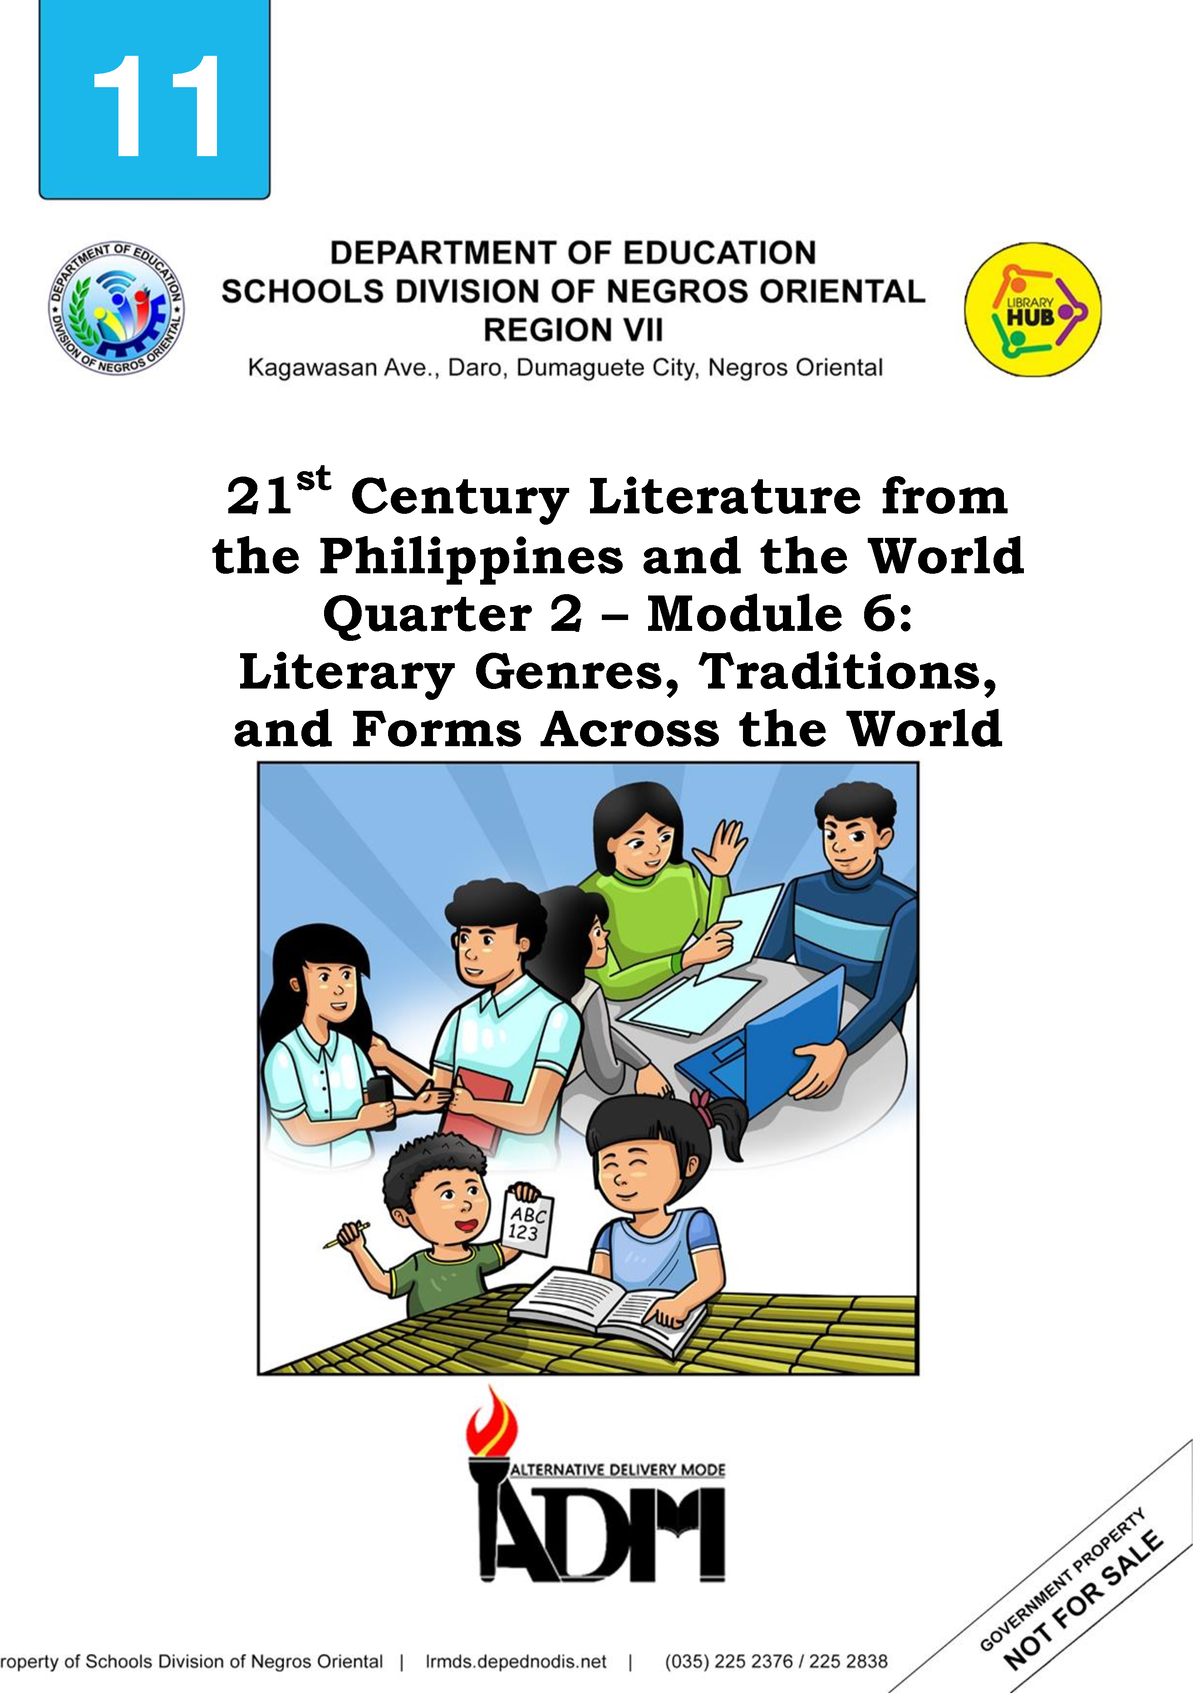 Q2-M6 - Good luck - 11 21 st Century Literature from the Philippines ...